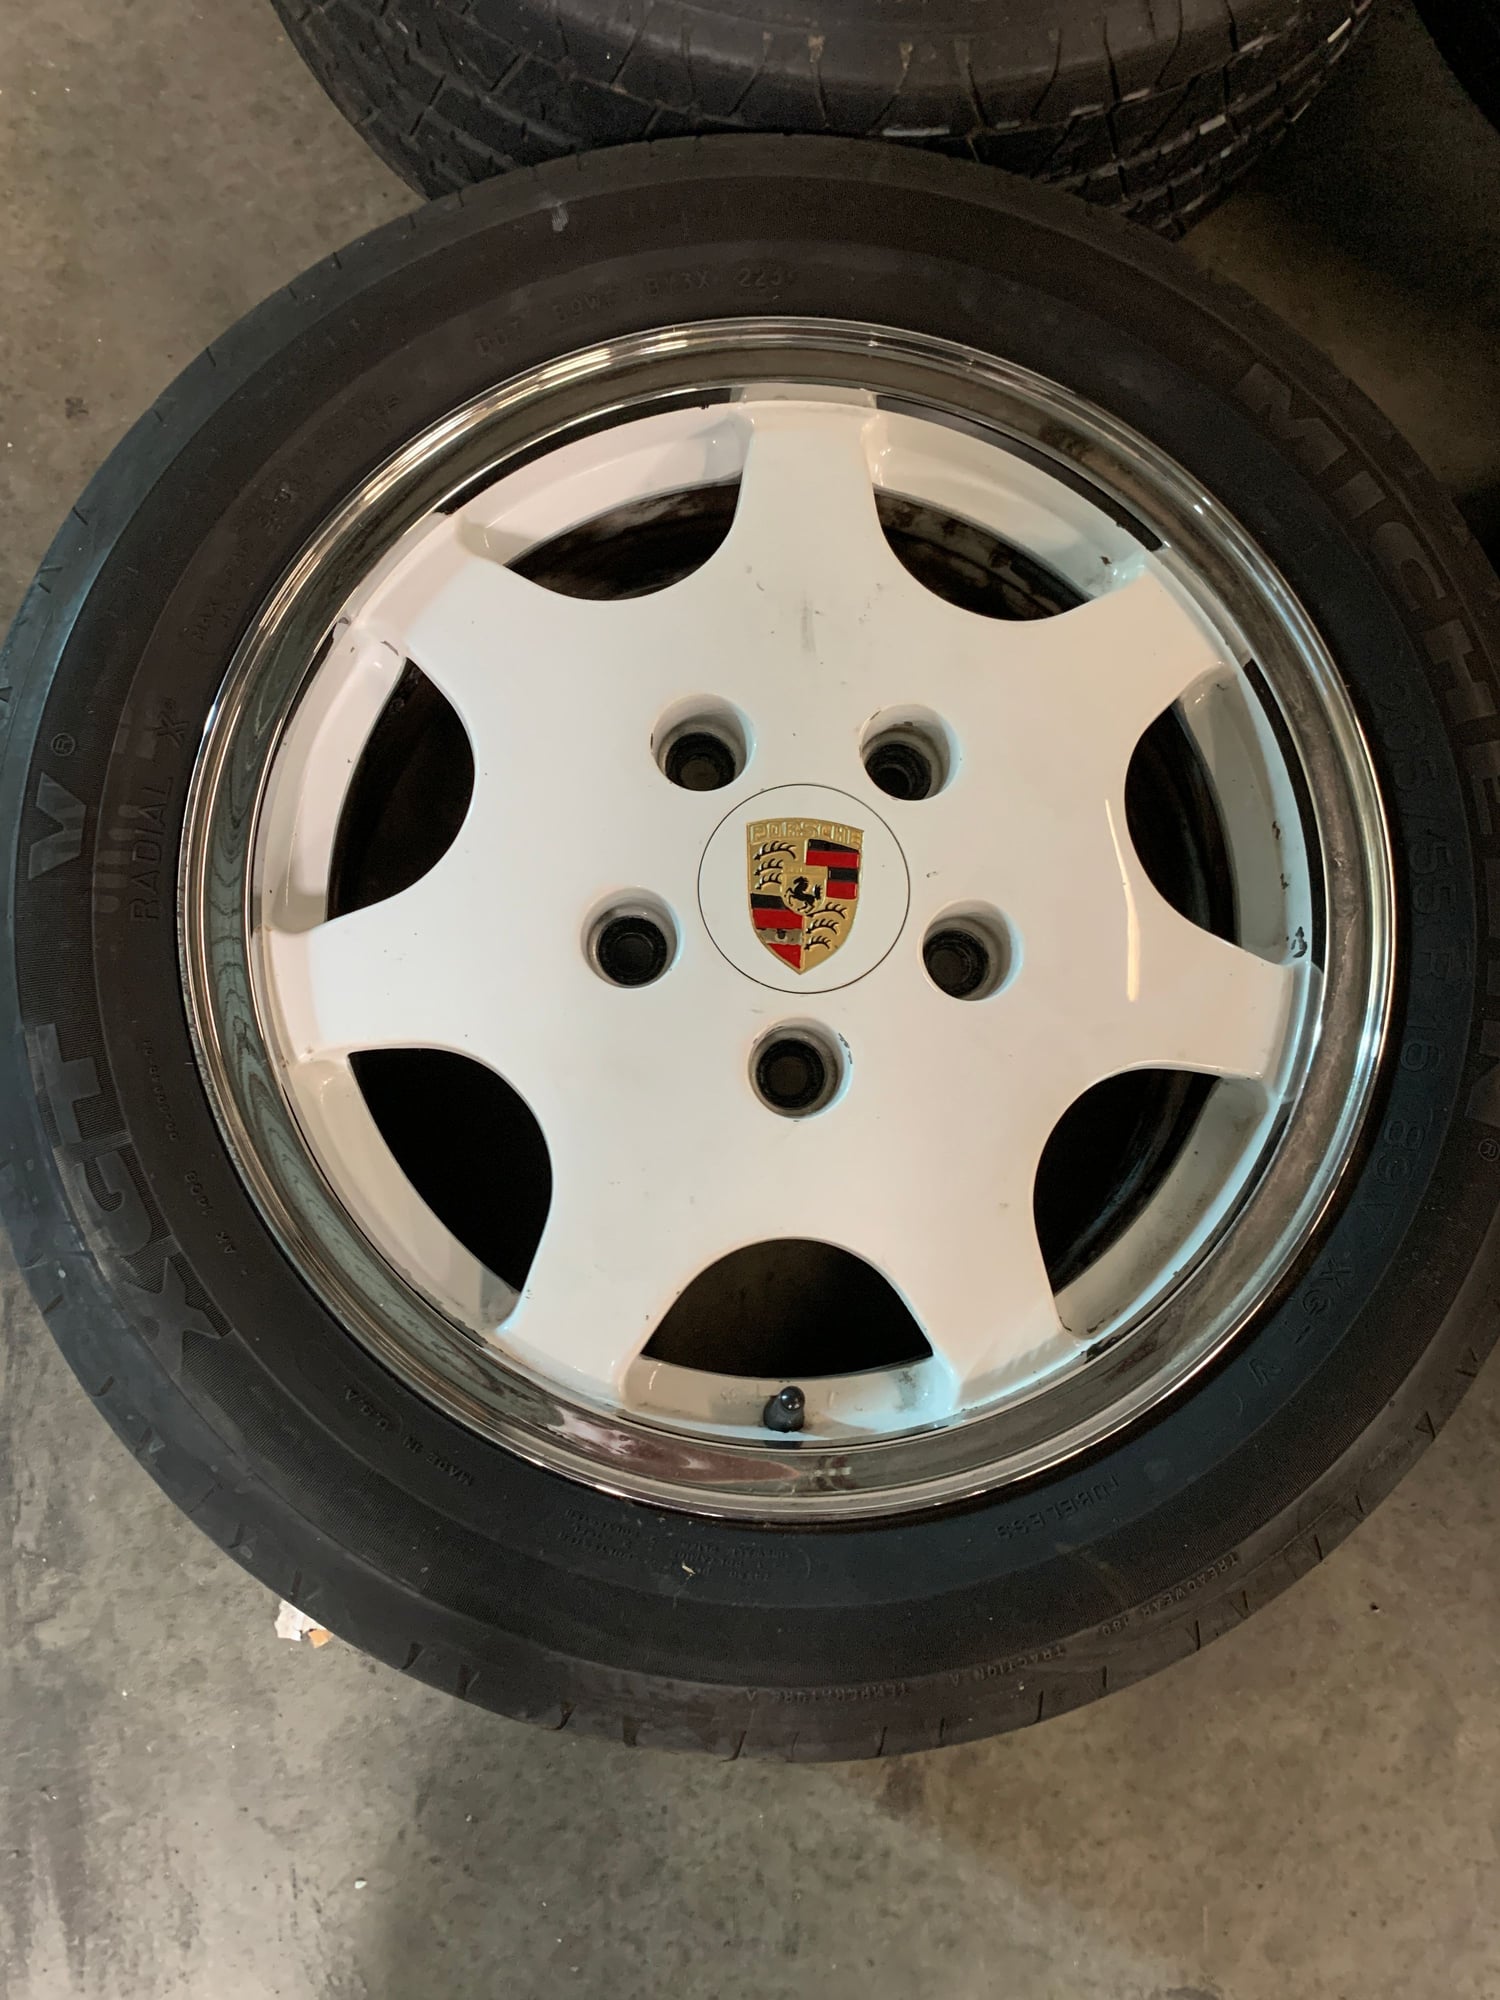 Wheels and Tires/Axles - Porsche D90 Wheels with Tires - Used - 1989 to 1994 Porsche 911 - 1982 to 1991 Porsche 944 - Baltimore, MD 21075, United States